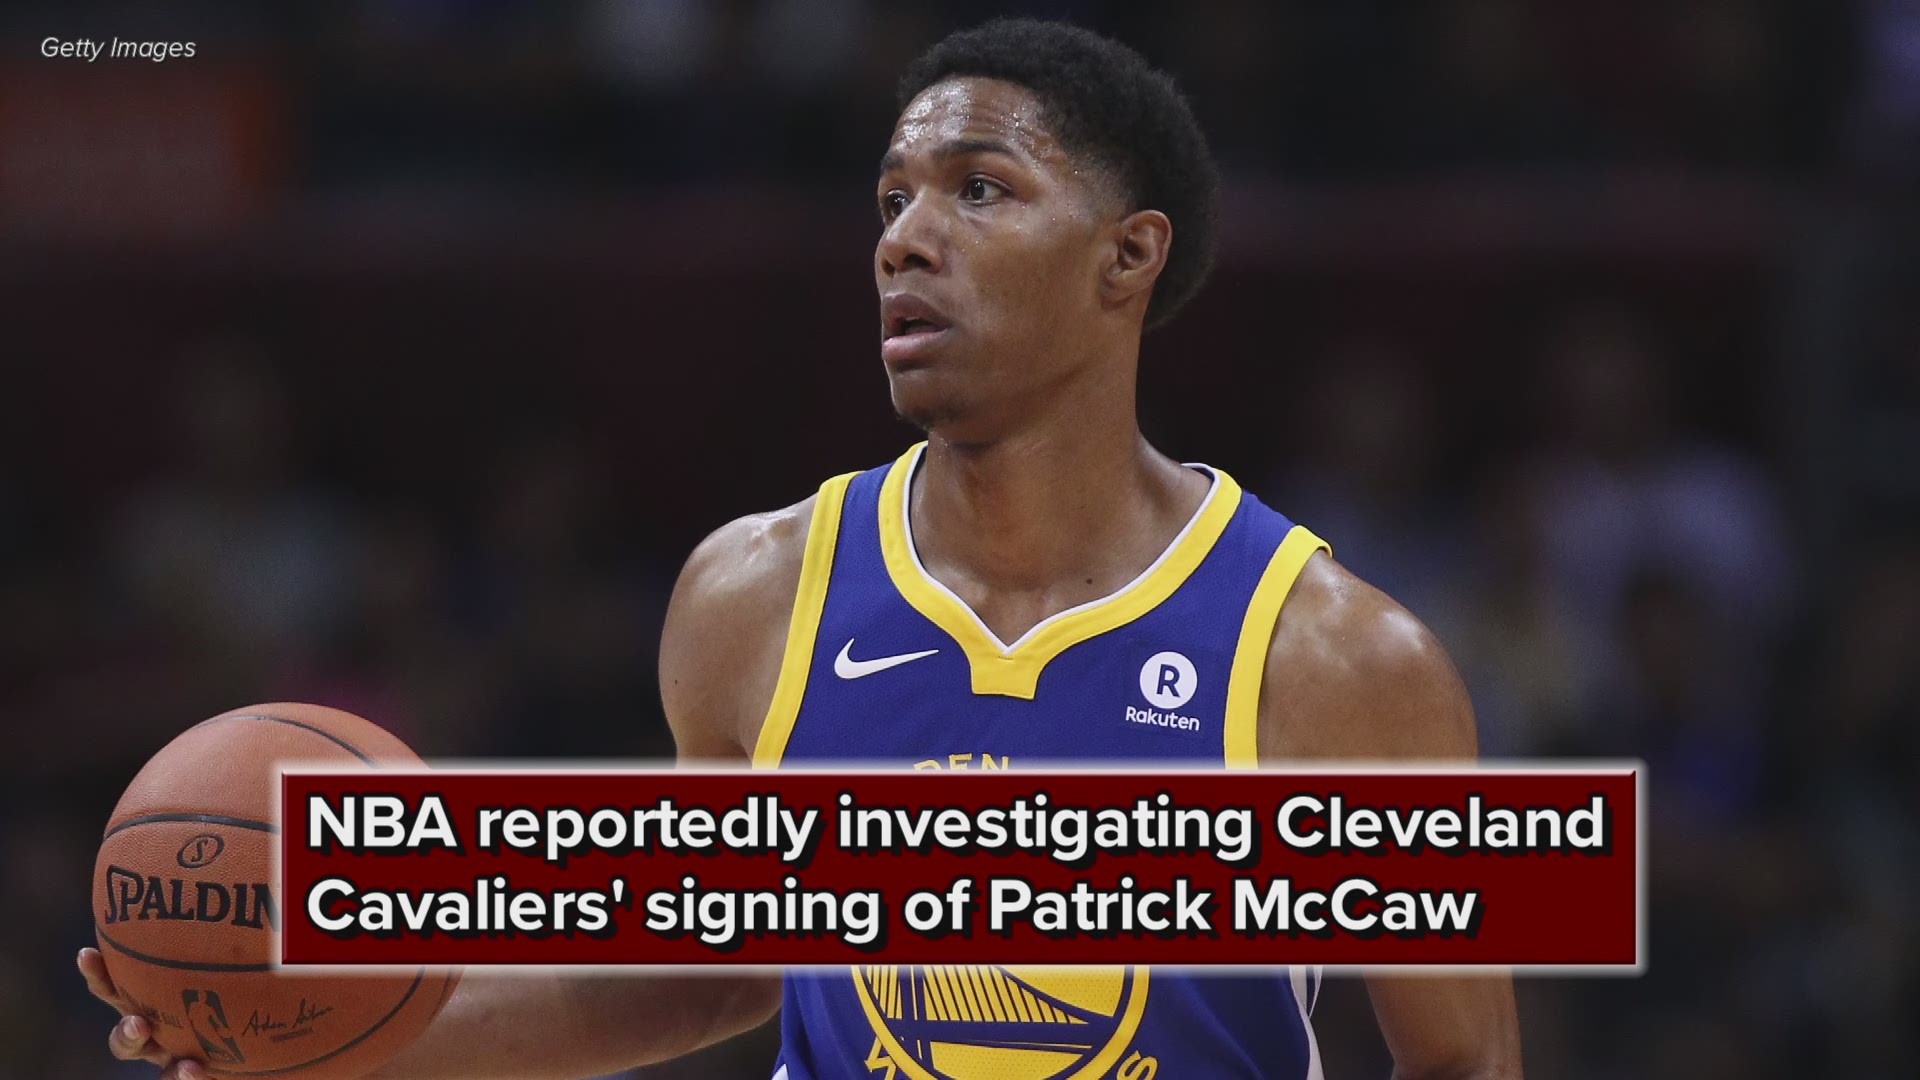 According to the New York Times, the NBA is investigating the Cleveland Cavaliers' signing and subsequent release of former Golden State Warriors guard Patrick McCaw.